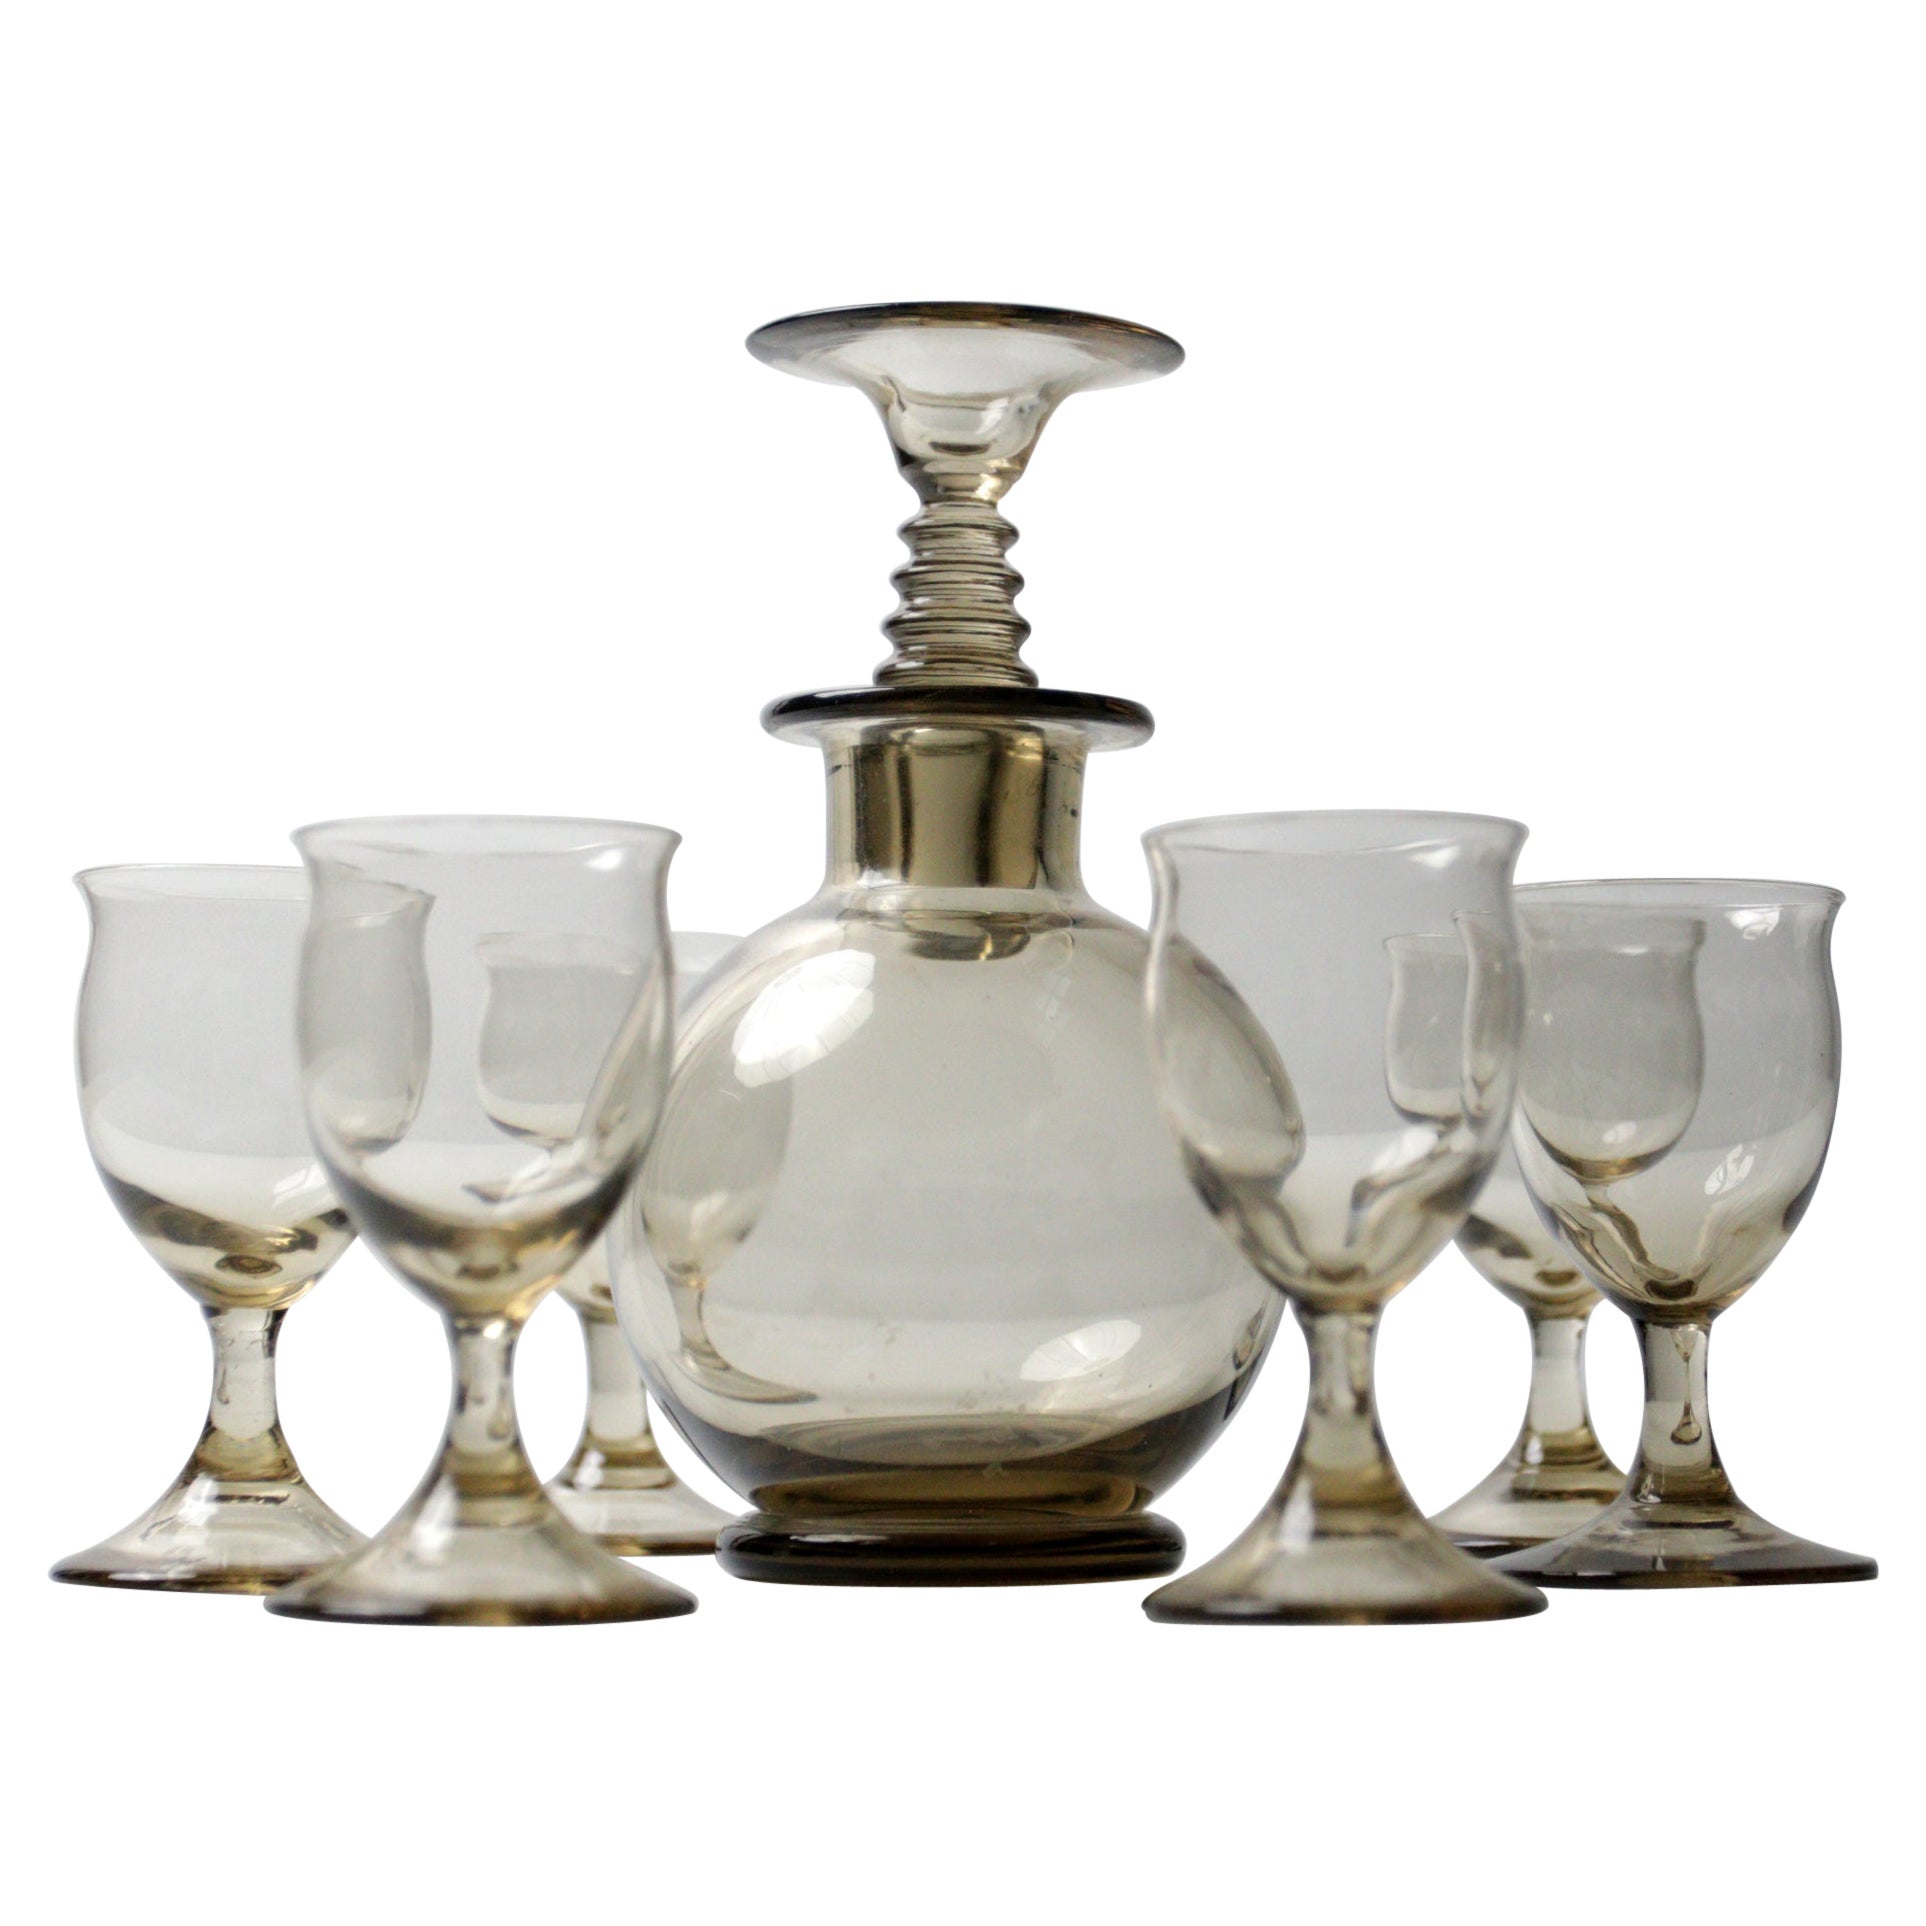 Set of 7 Art Deco "Traditie" W.J. Rozendaal 1932-'33 Decanter and 6 Glasses For Sale